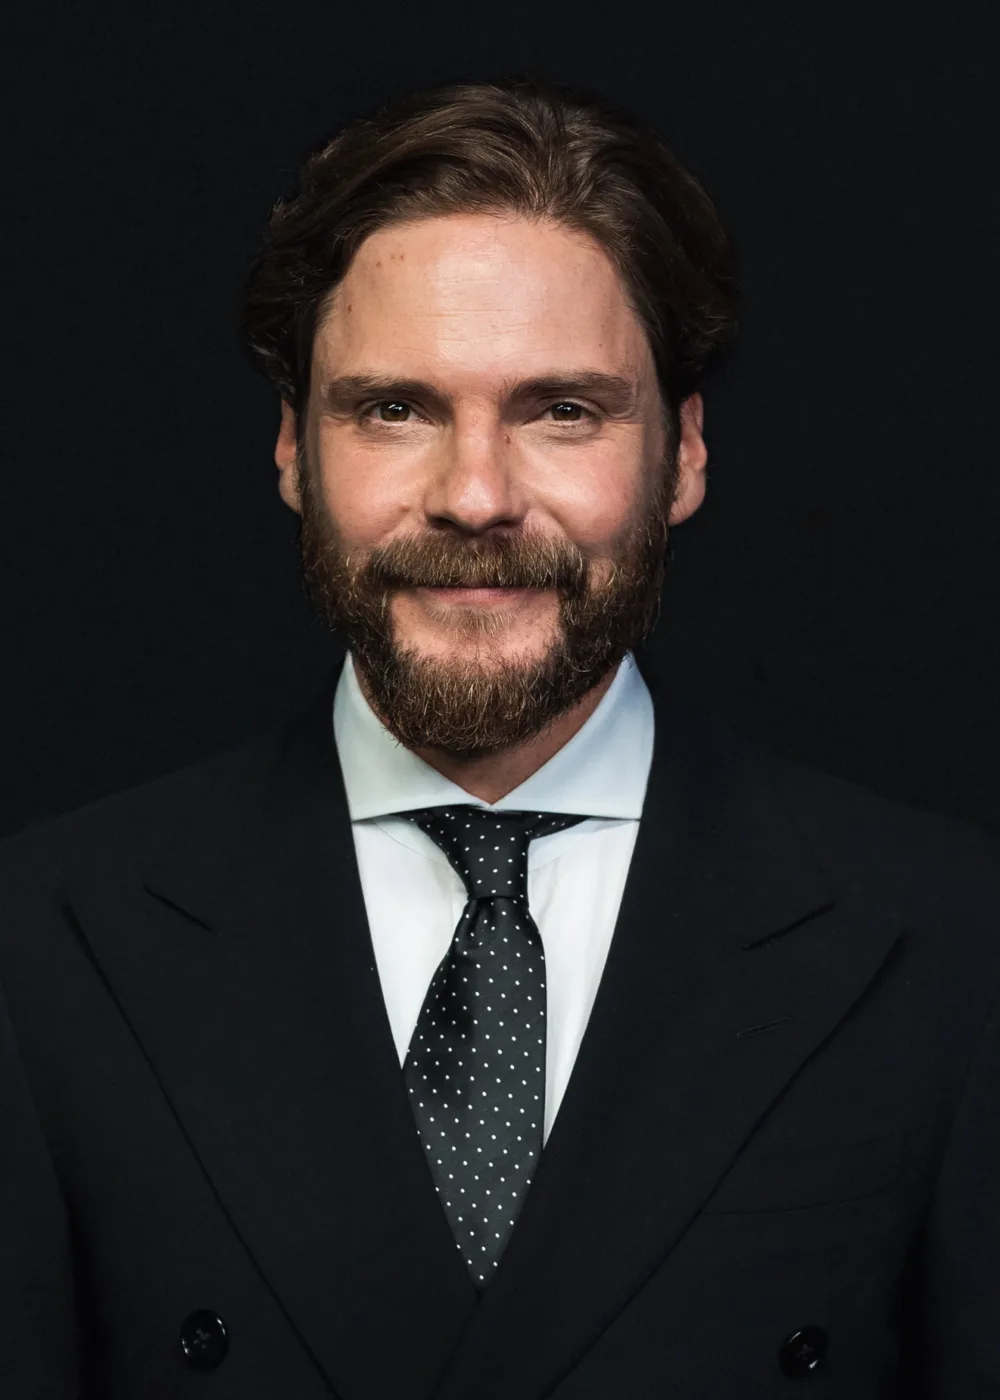 Daniel Brühl is a Spanish-German actor known for his versatile performances in film, television, and theater. Born in Barcelona in 1978, Brühl grew up in a multilingual household and developed a passion for acting at an early age. He made his film debut in 2001 with the German film 